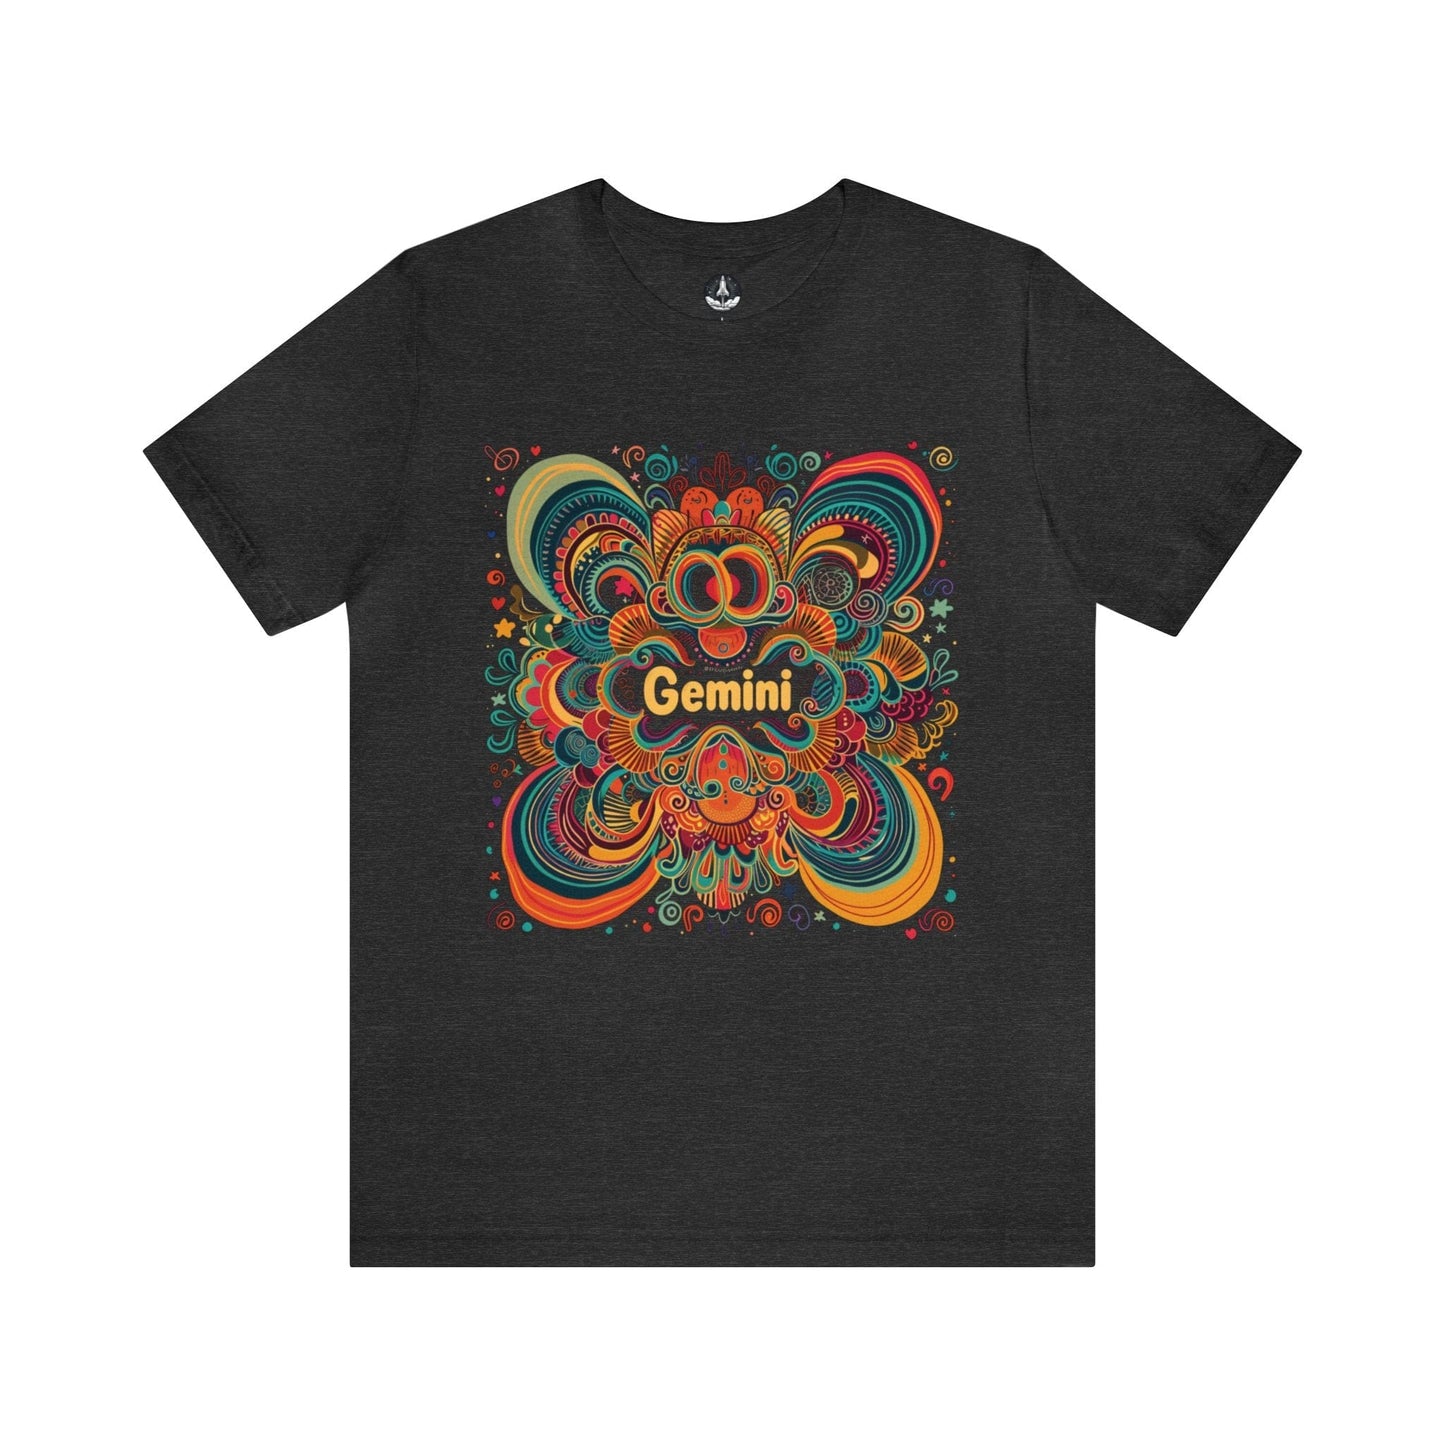 T-Shirt Dark Grey Heather / S Gemini Psychedelic Harmony T-Shirt: A Vivid Ode to the Twin Spirits